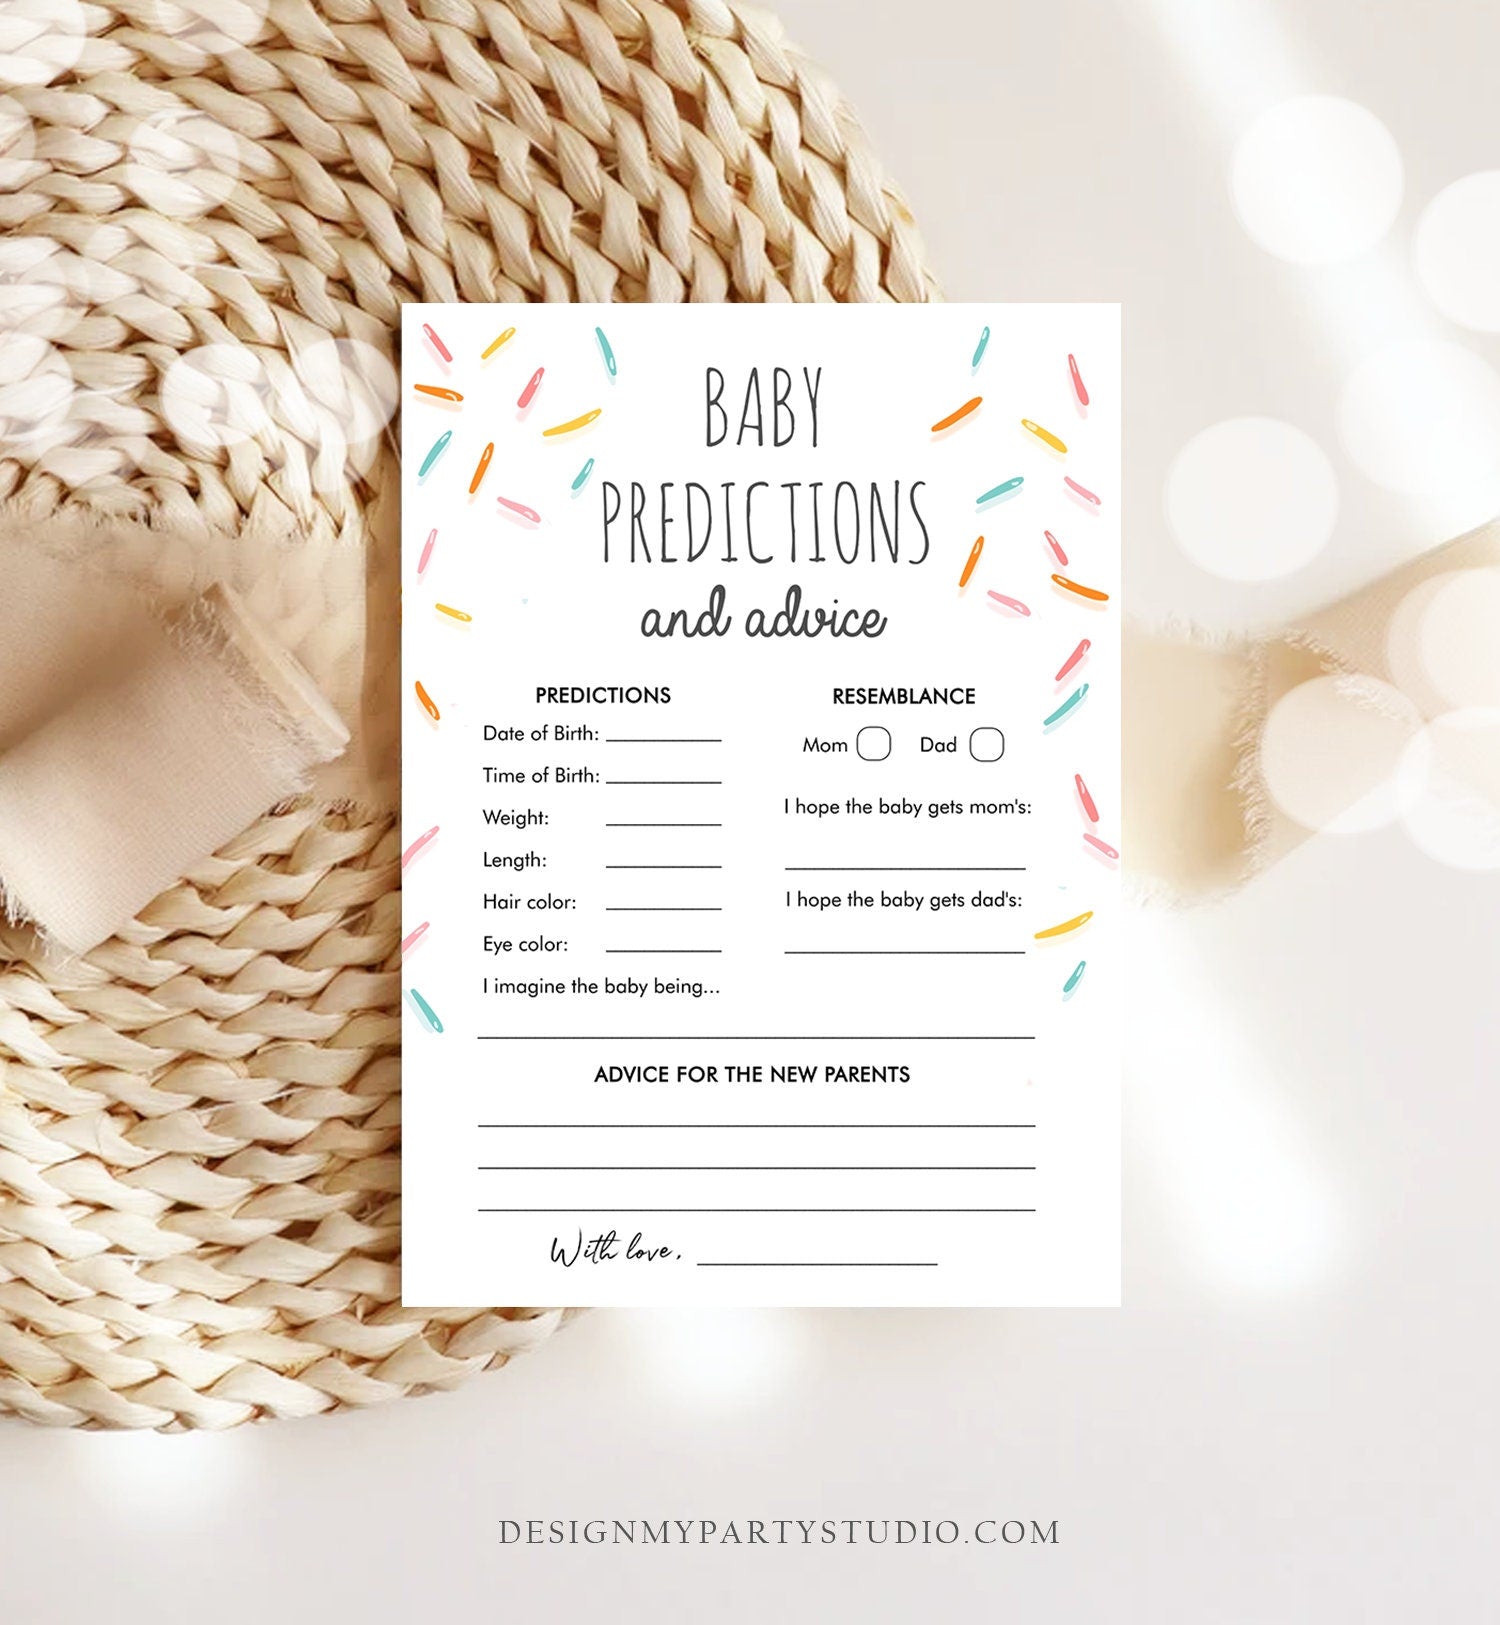 Editable Baby Predictions and Advice for Parents Sprinkle Game Baby Shower Gender Neutral Sprinkles Rainbow Corjl Template Printable 0216